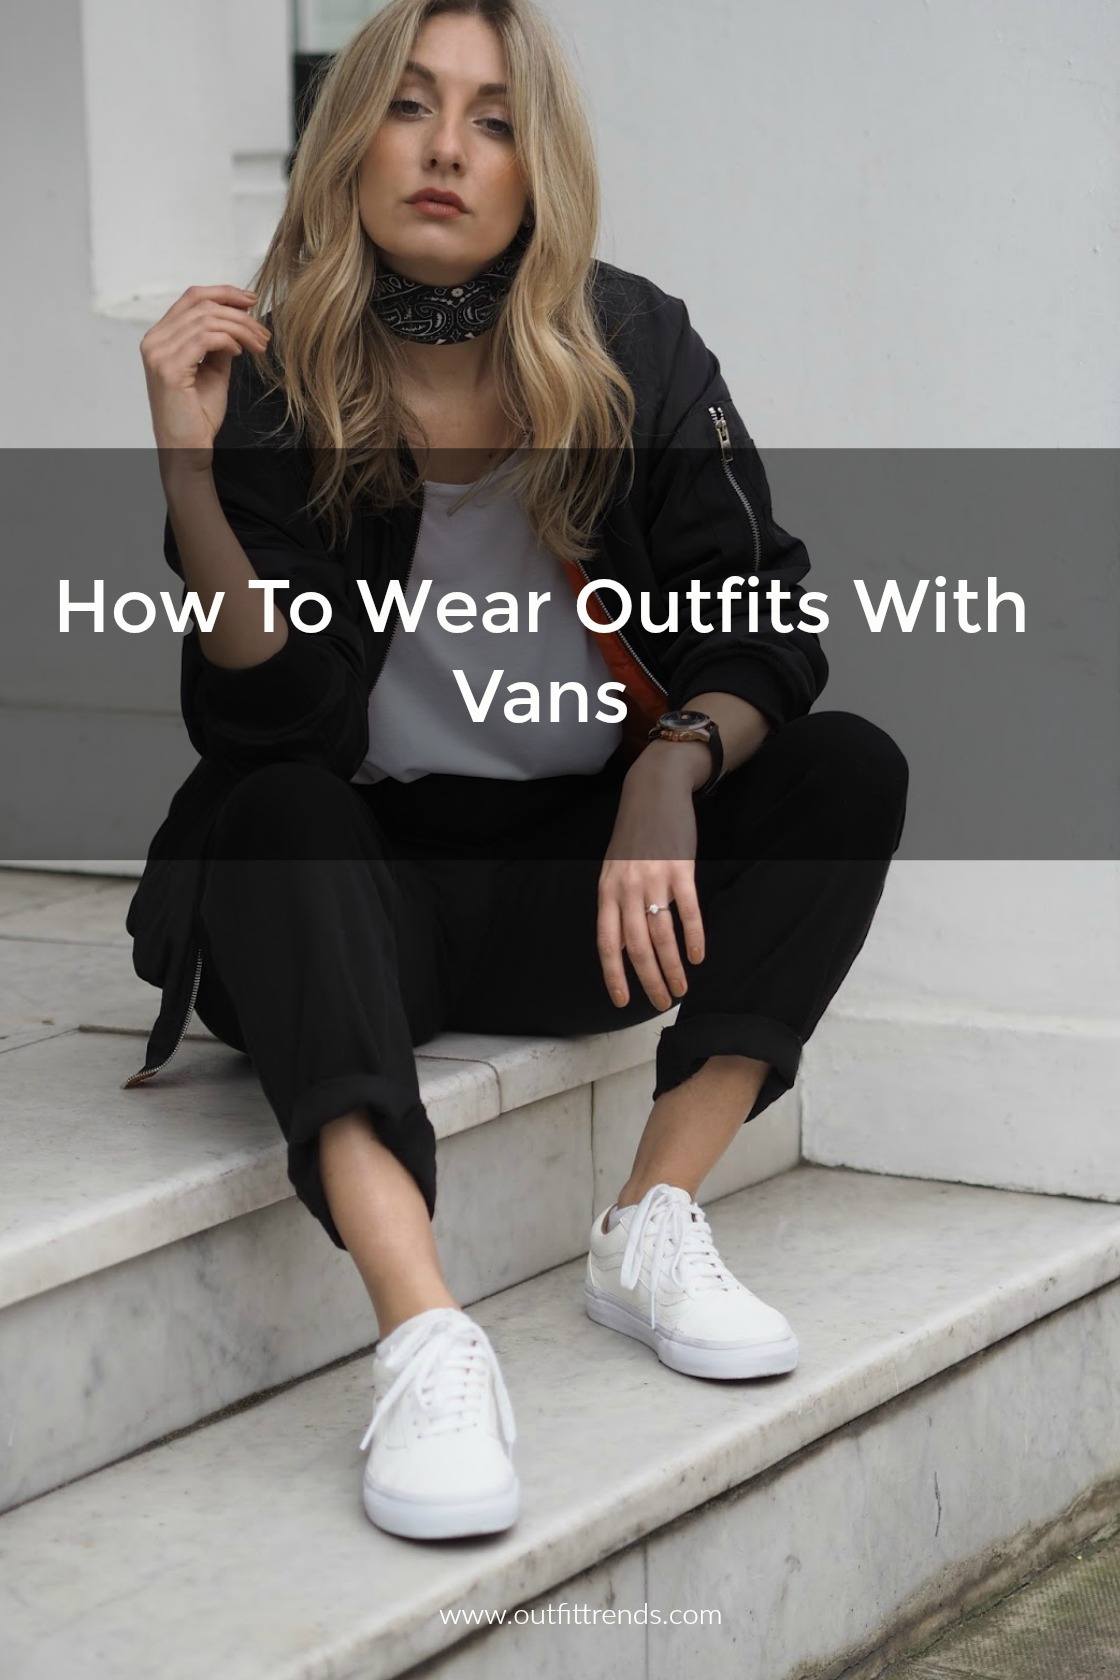 How To Wear Vans What To Wear With Vans! (14 Ways) Her Style Code ...